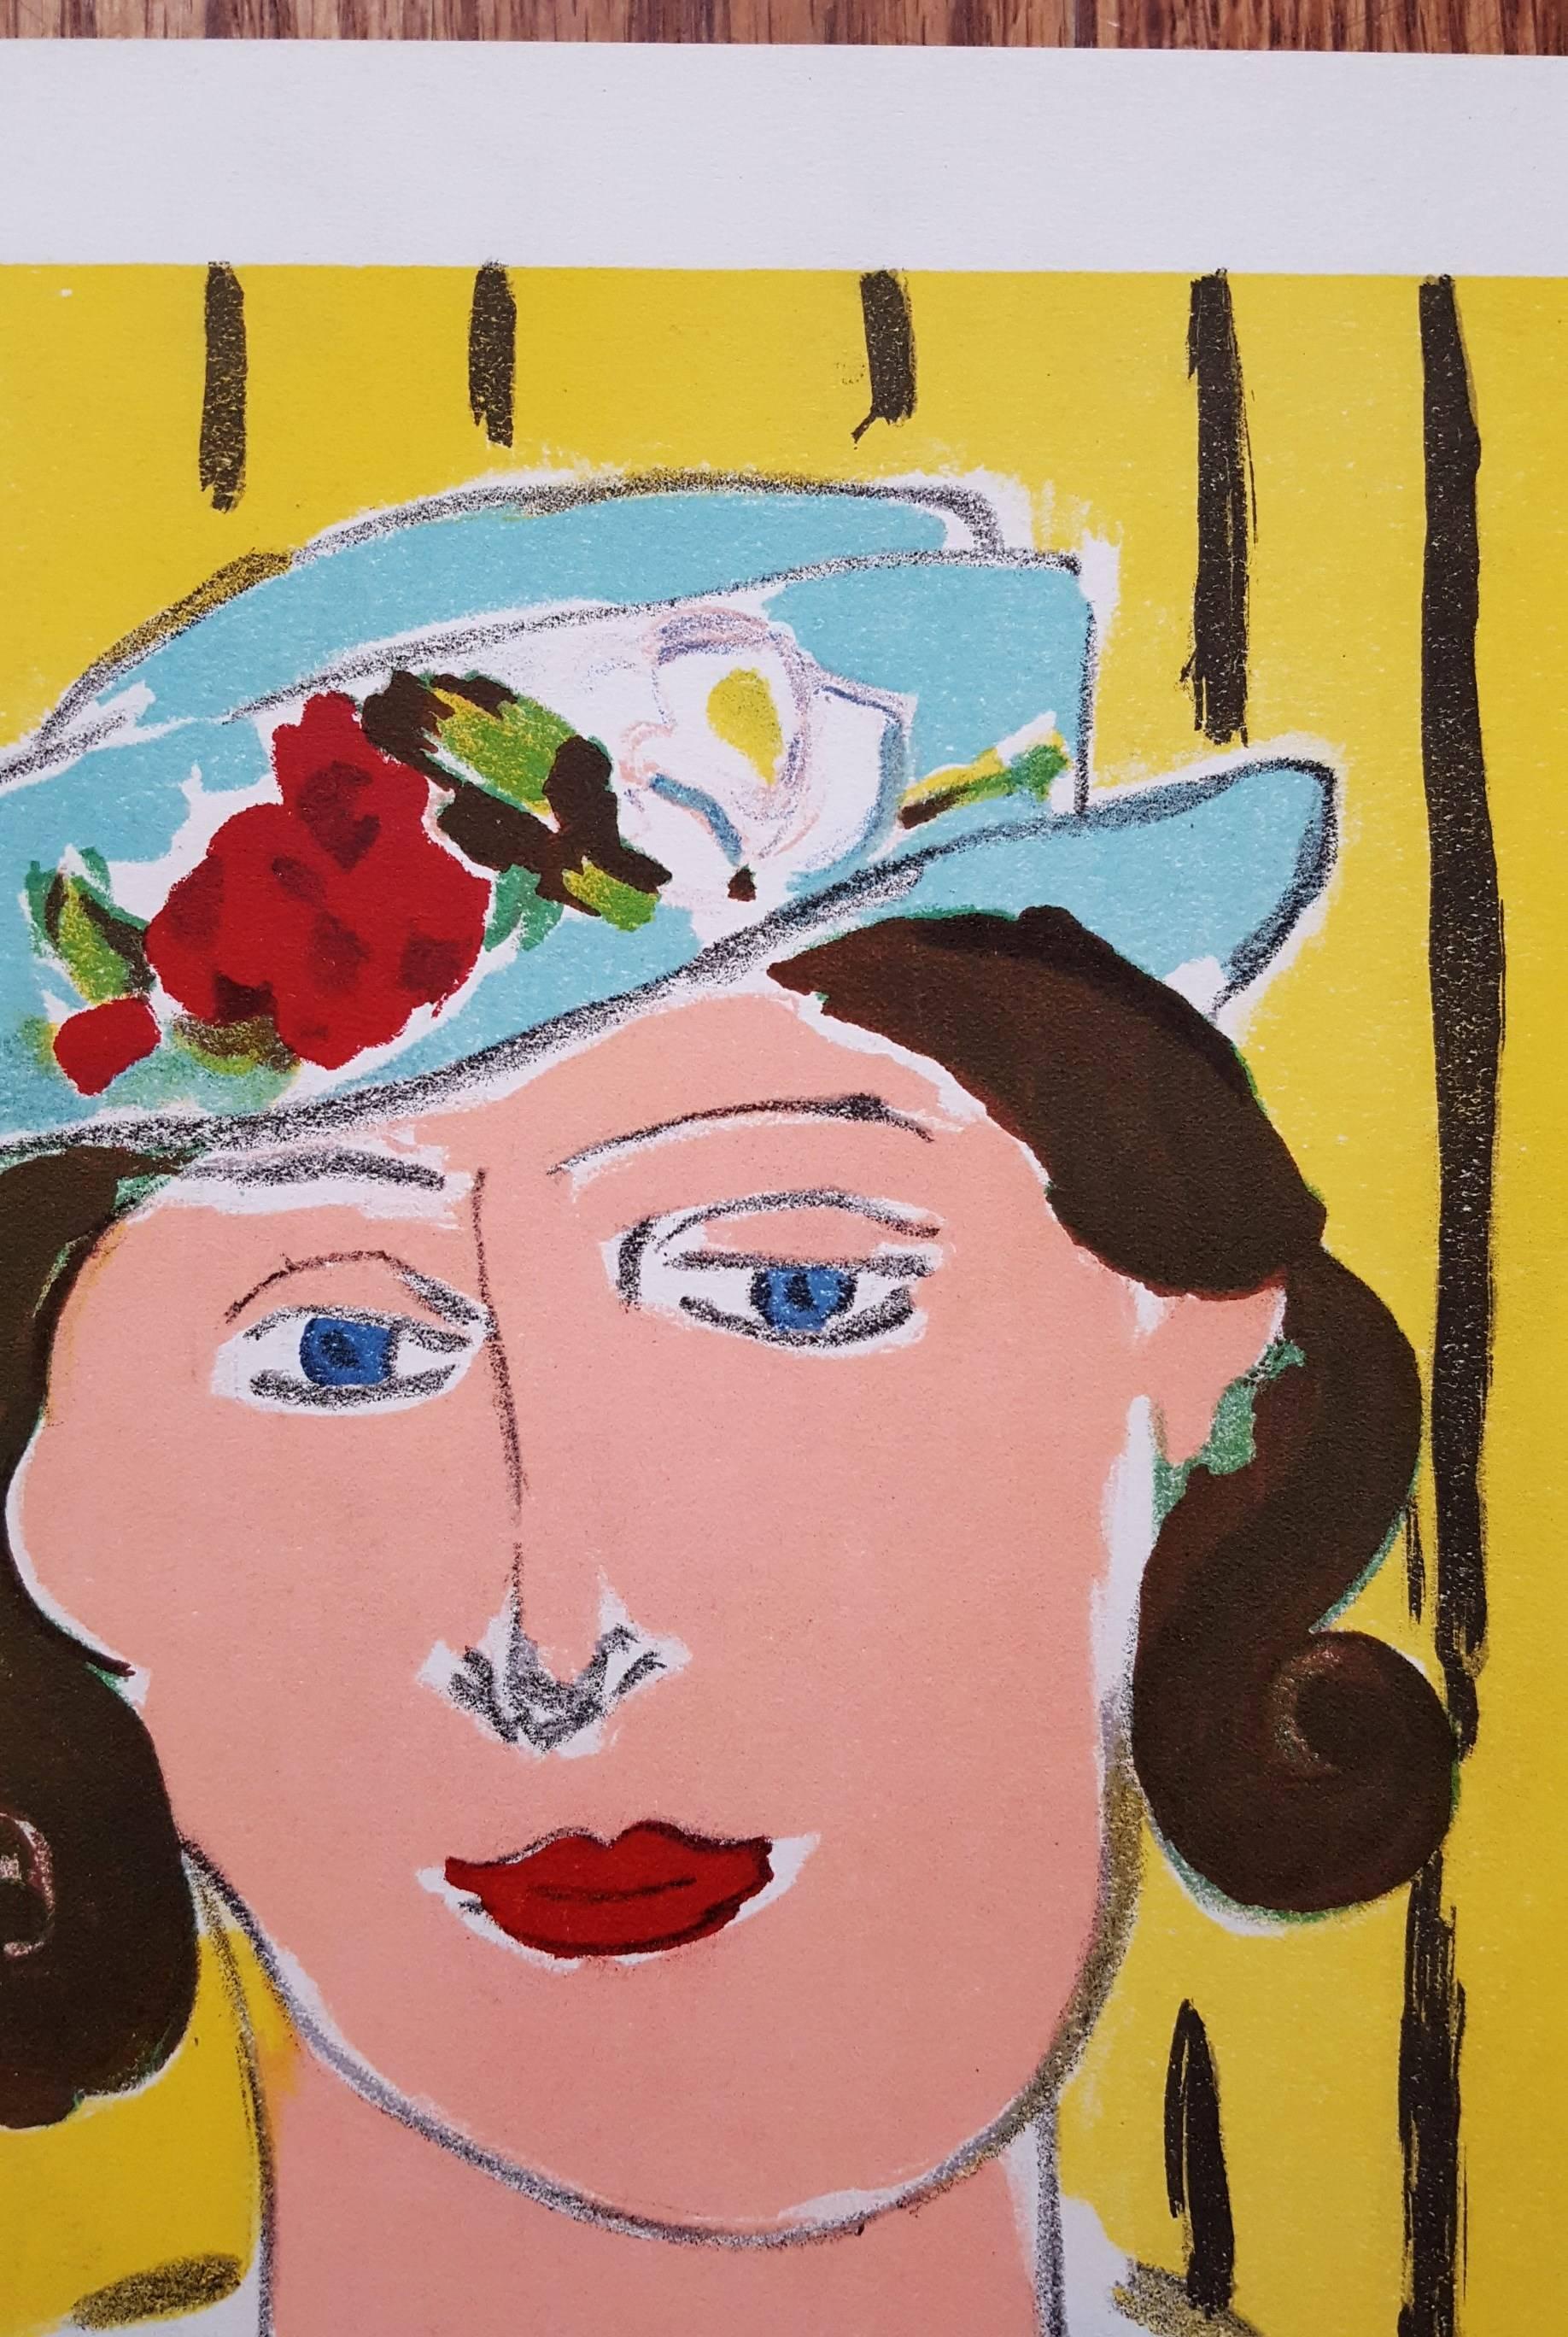 A high-quality vintage lithograph on wove after a painting by French artist Henri Matisse (1869-1954) titled "Femme au Chapeau", 1939. Comes from the famous "Verve" portfolio, Volume 1. Produced in a limited edition of an unknown